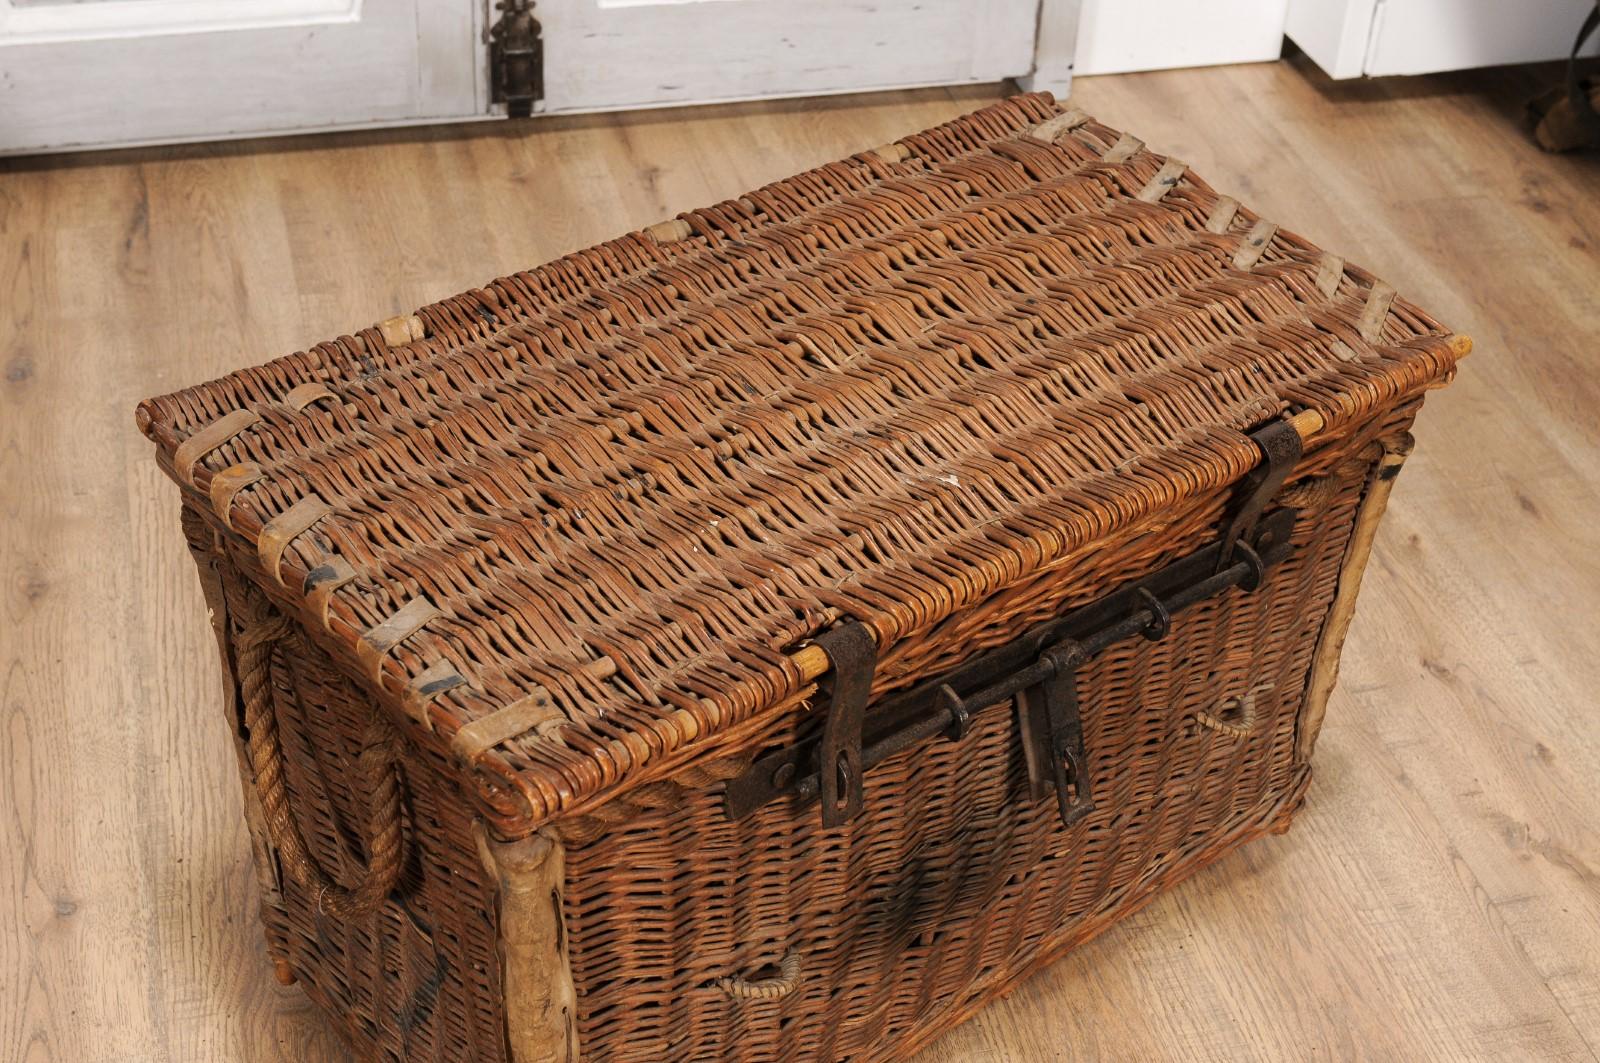 20th Century English Rustic 1930s Wicker Trunk with Iron Hardware and Lateral Handles For Sale